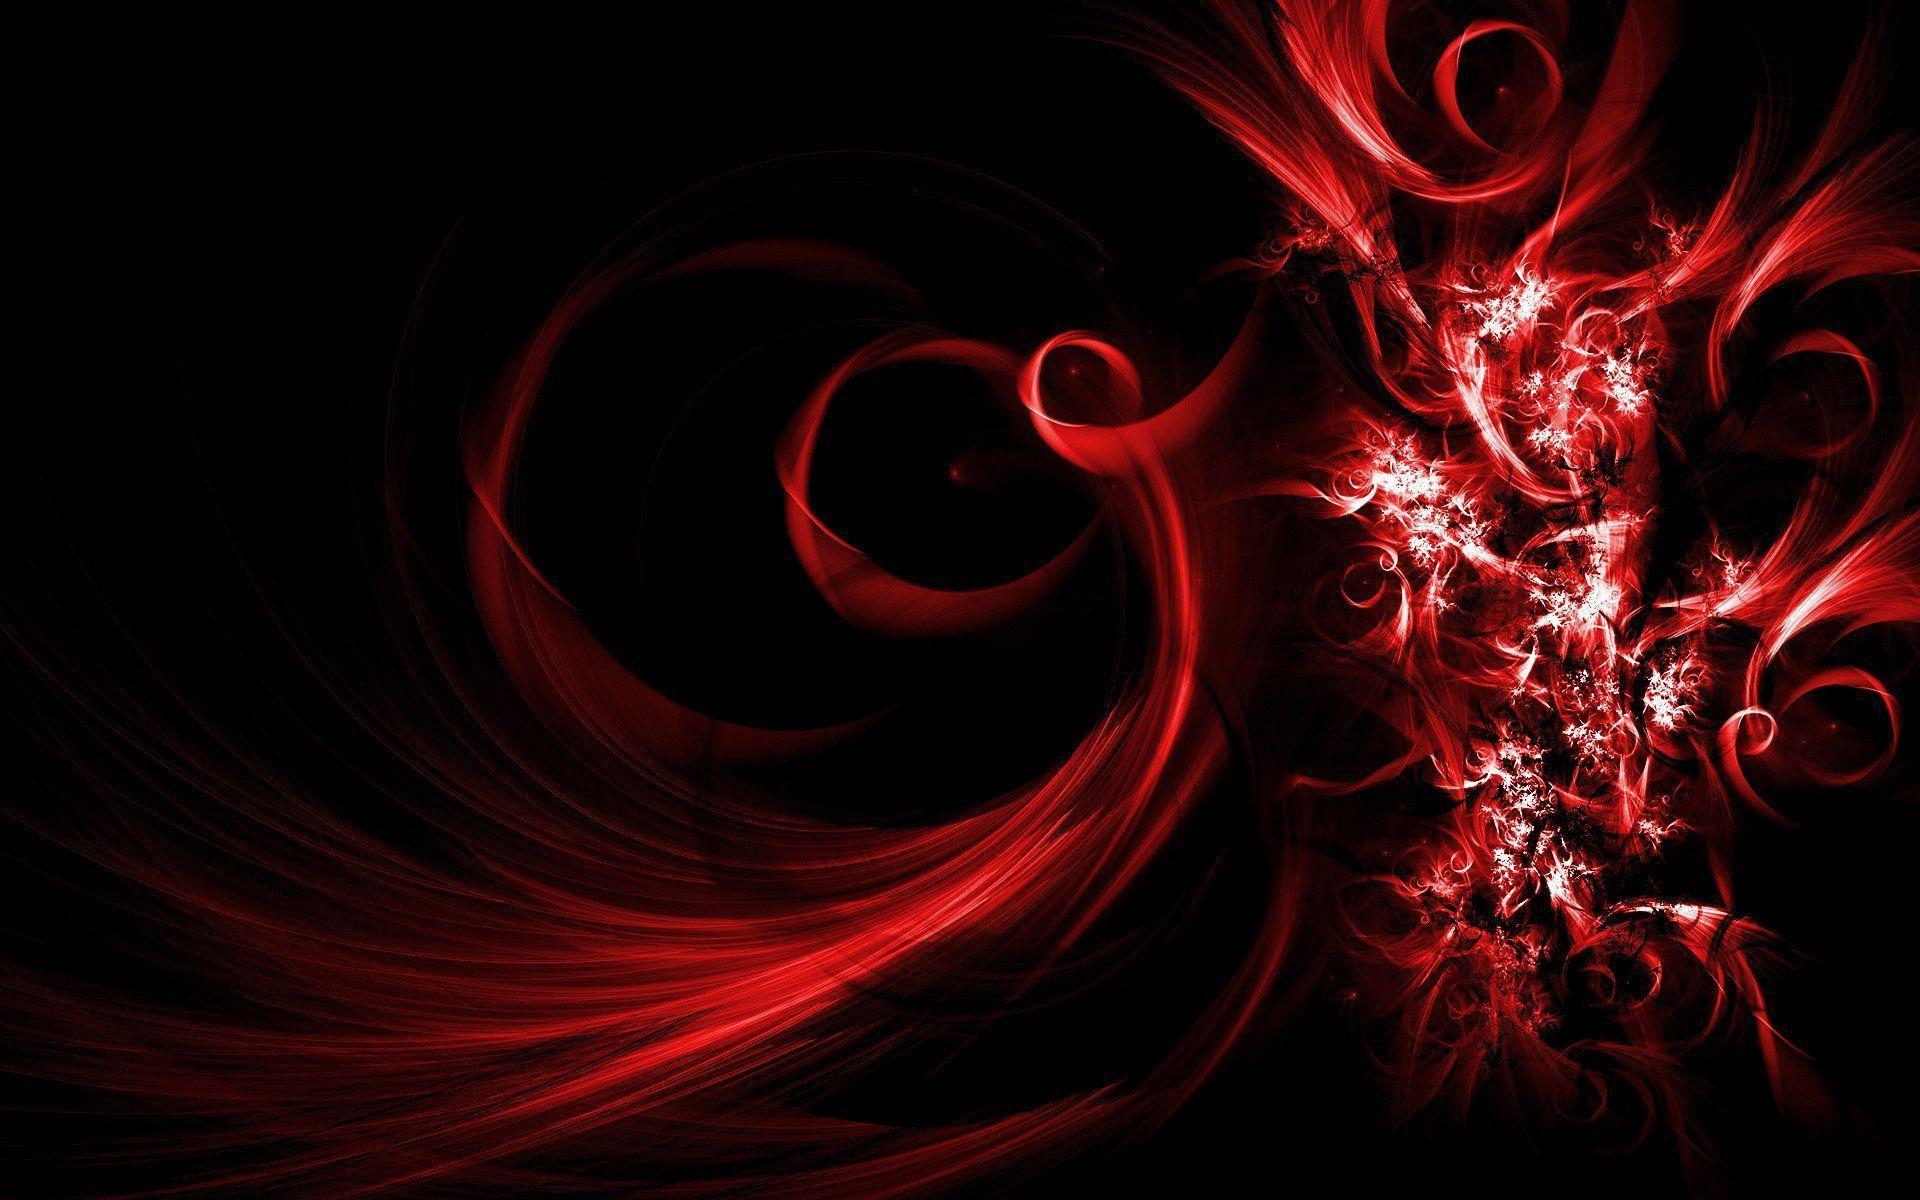 Black And Red Abstract Wallpapers Hd 1080P 12 HD Wallpapers